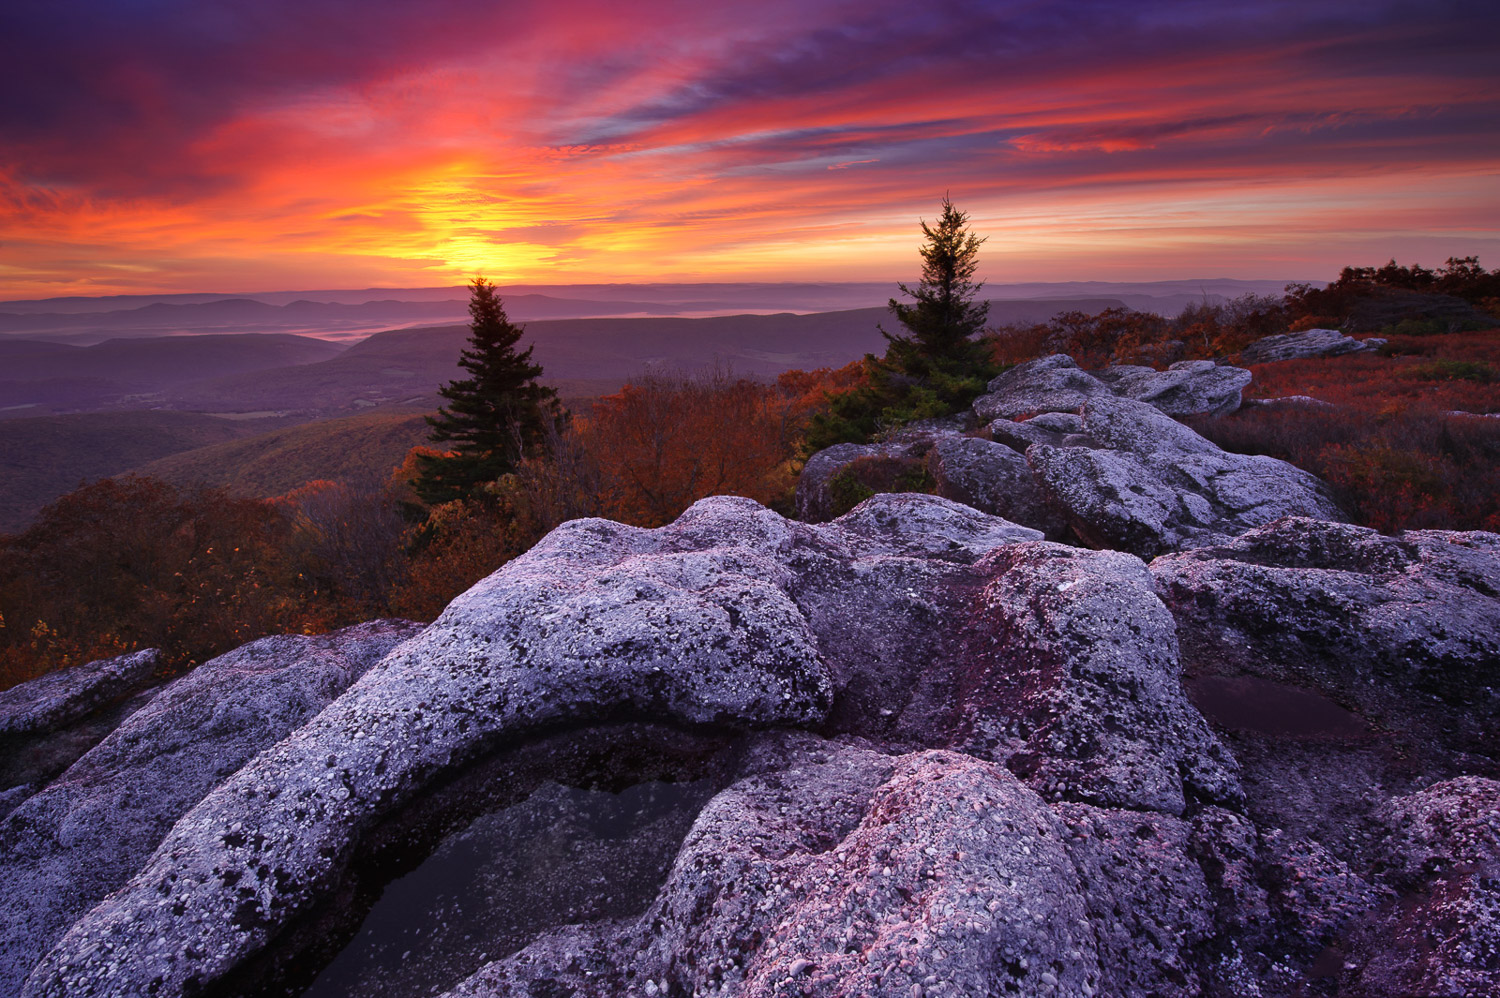 Rock ledge and the Allegheny Mountains at sunrise from the summit of Bear Rocks, Dolly Sods Wilderness, West Virginia.